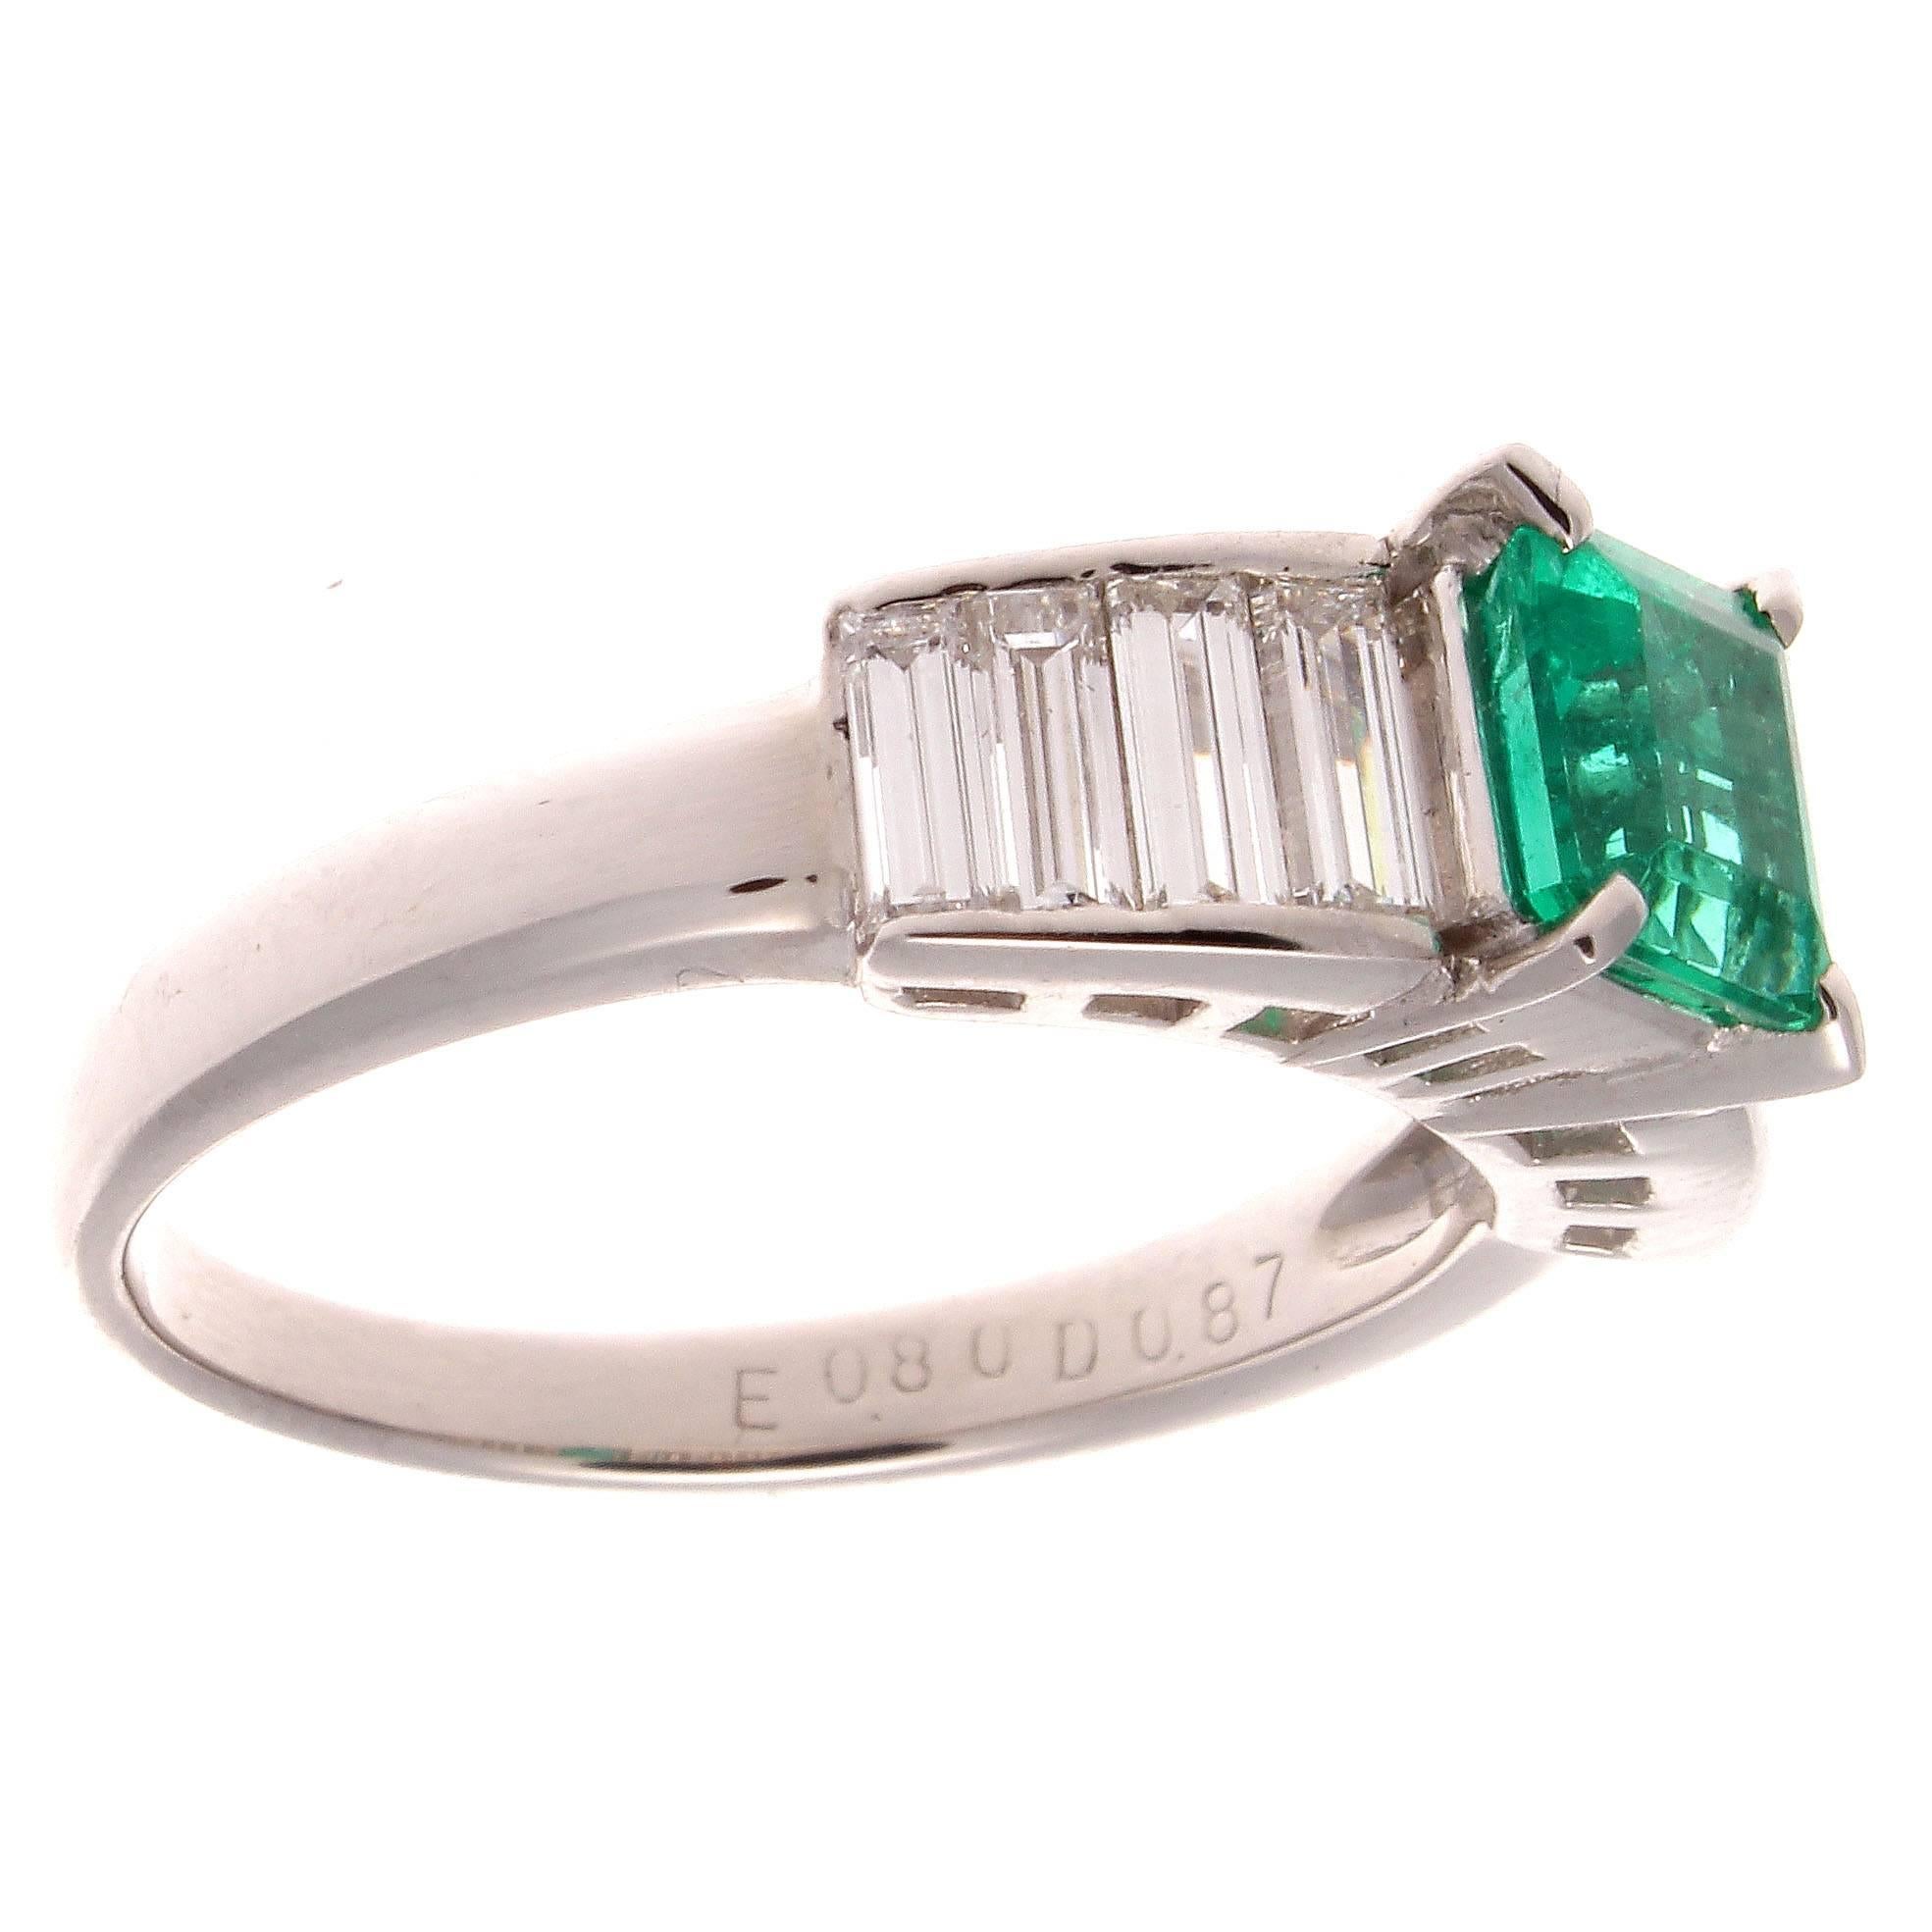 A unique and stunning engagement ring. The rich forest green Colombian emerald weighs 0.80 carats and the 8 accenting white emerald cut diamonds weigh 0.87 carats. In platinum.

Ring size 6 and may be re-sized to fit.